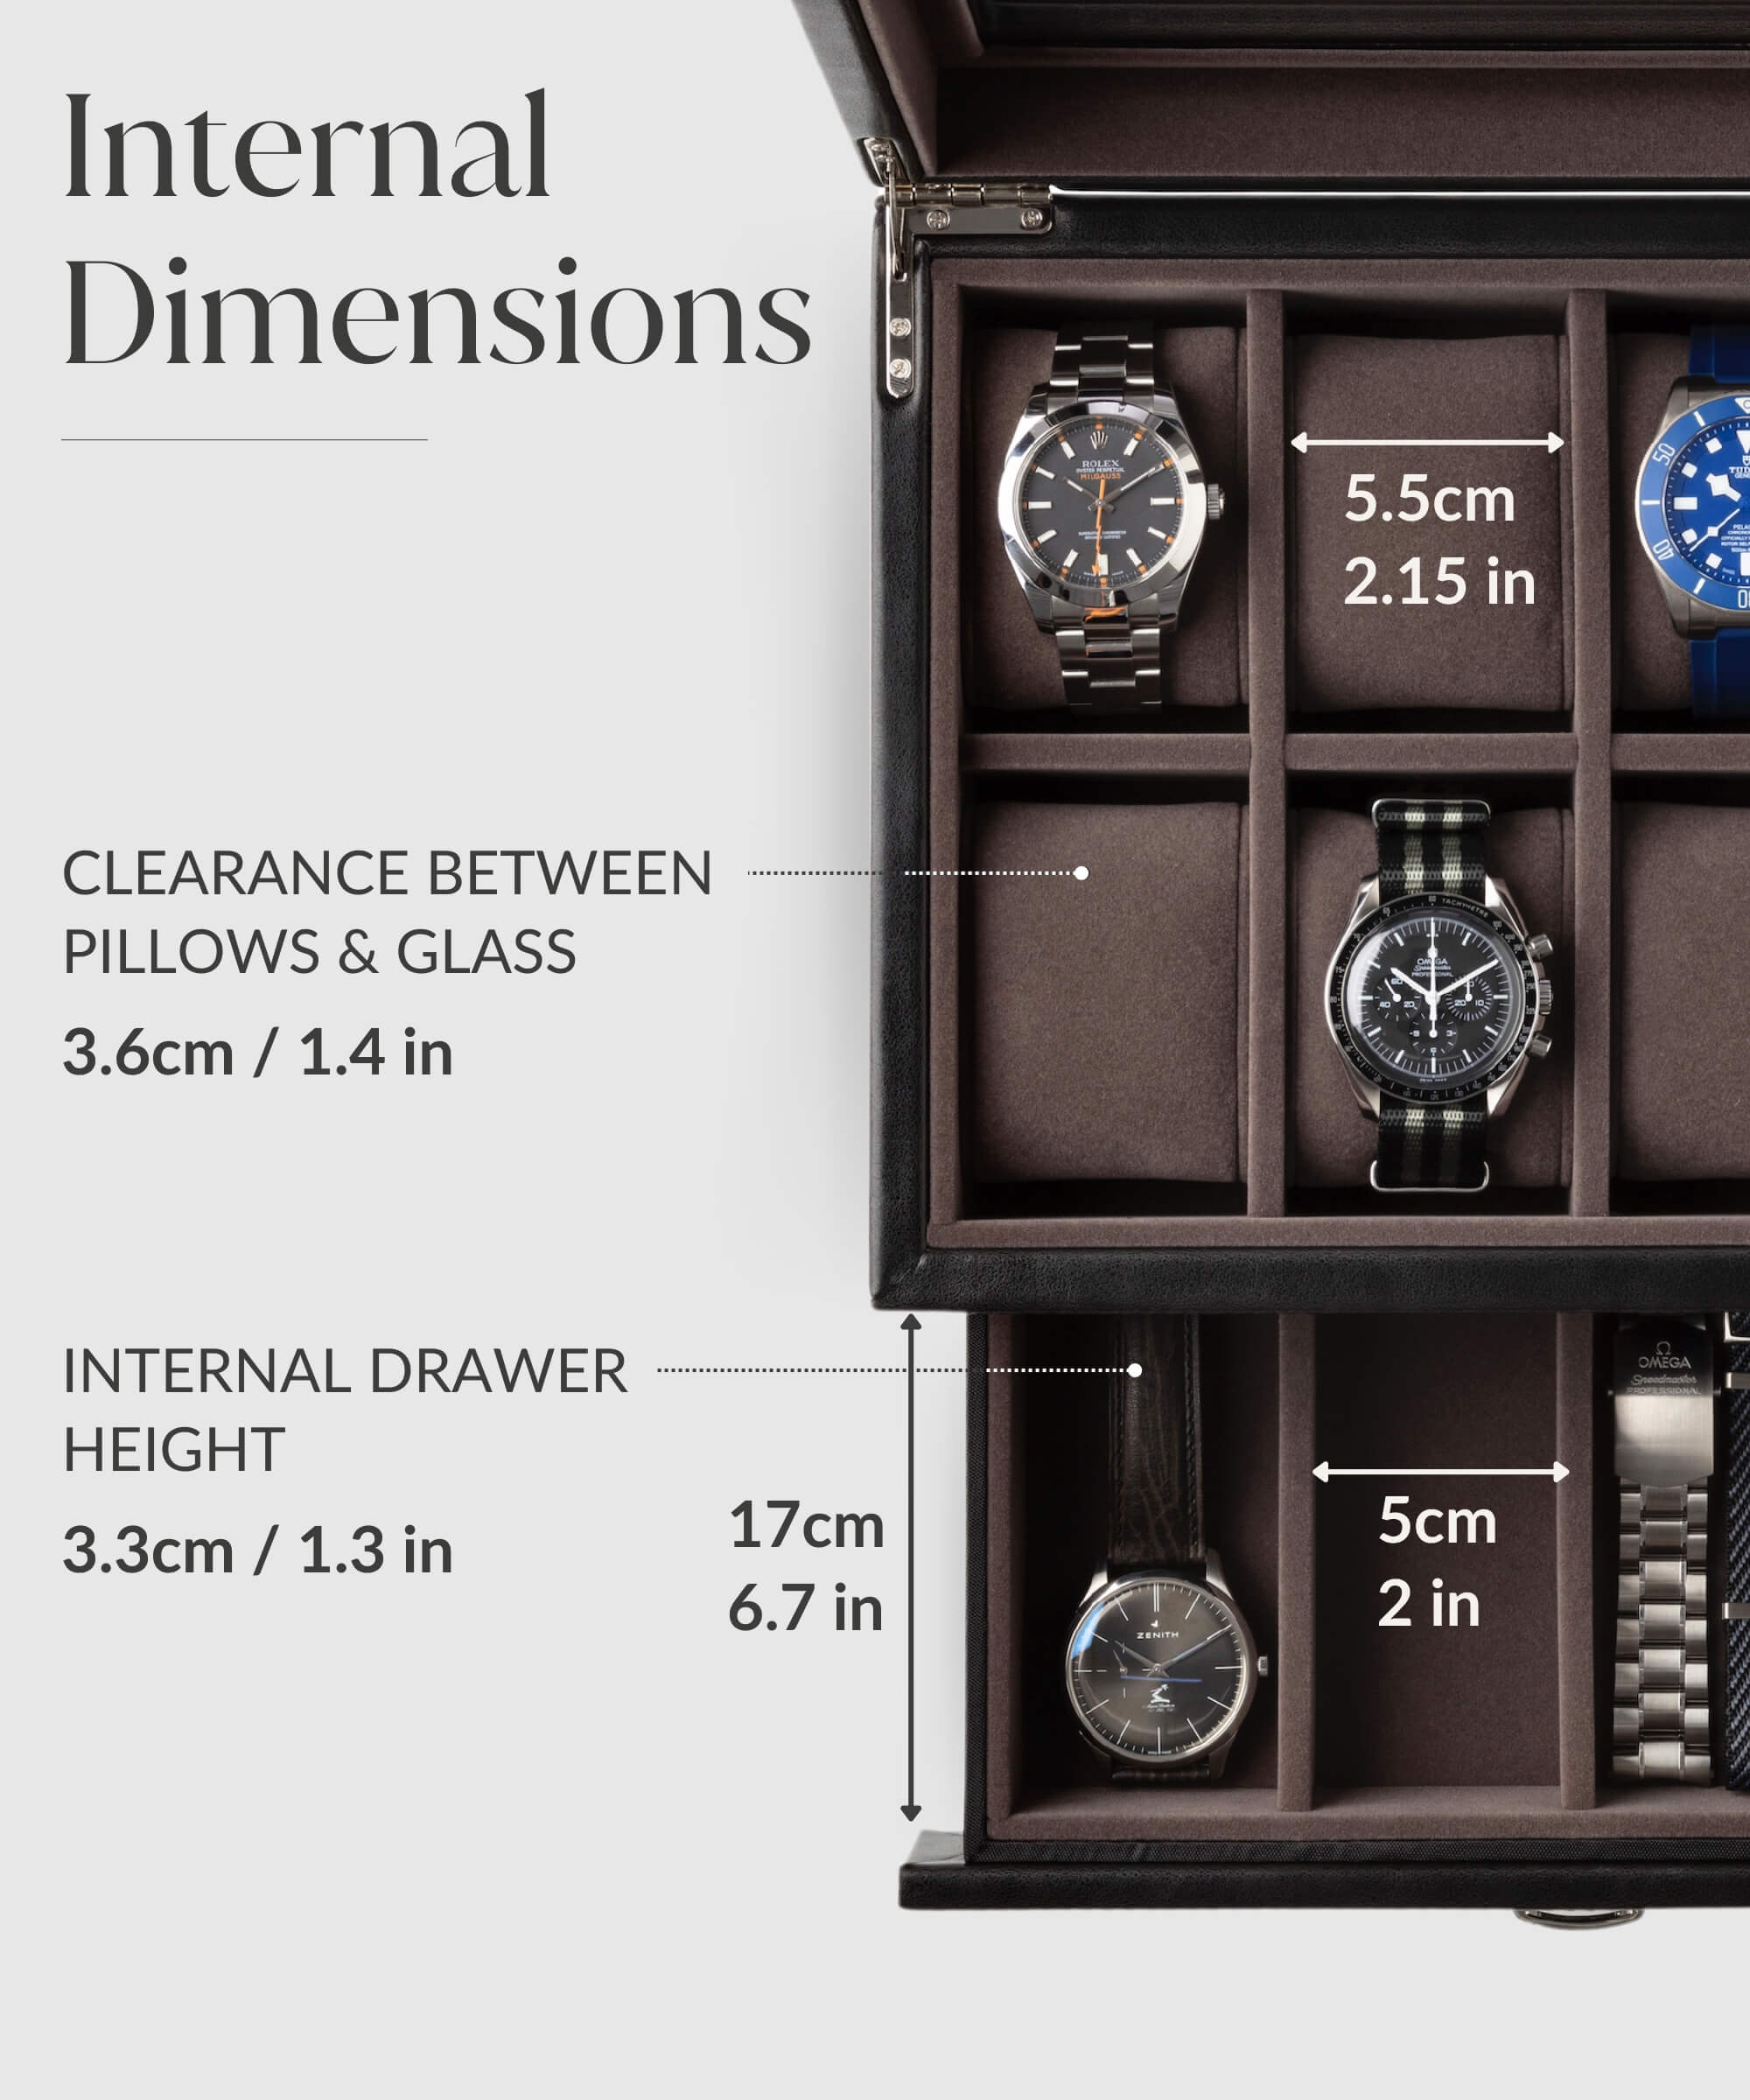 A TAWBURY Bayswater 8 Slot Watch Box with Drawer - Black with storage for oversized watches.